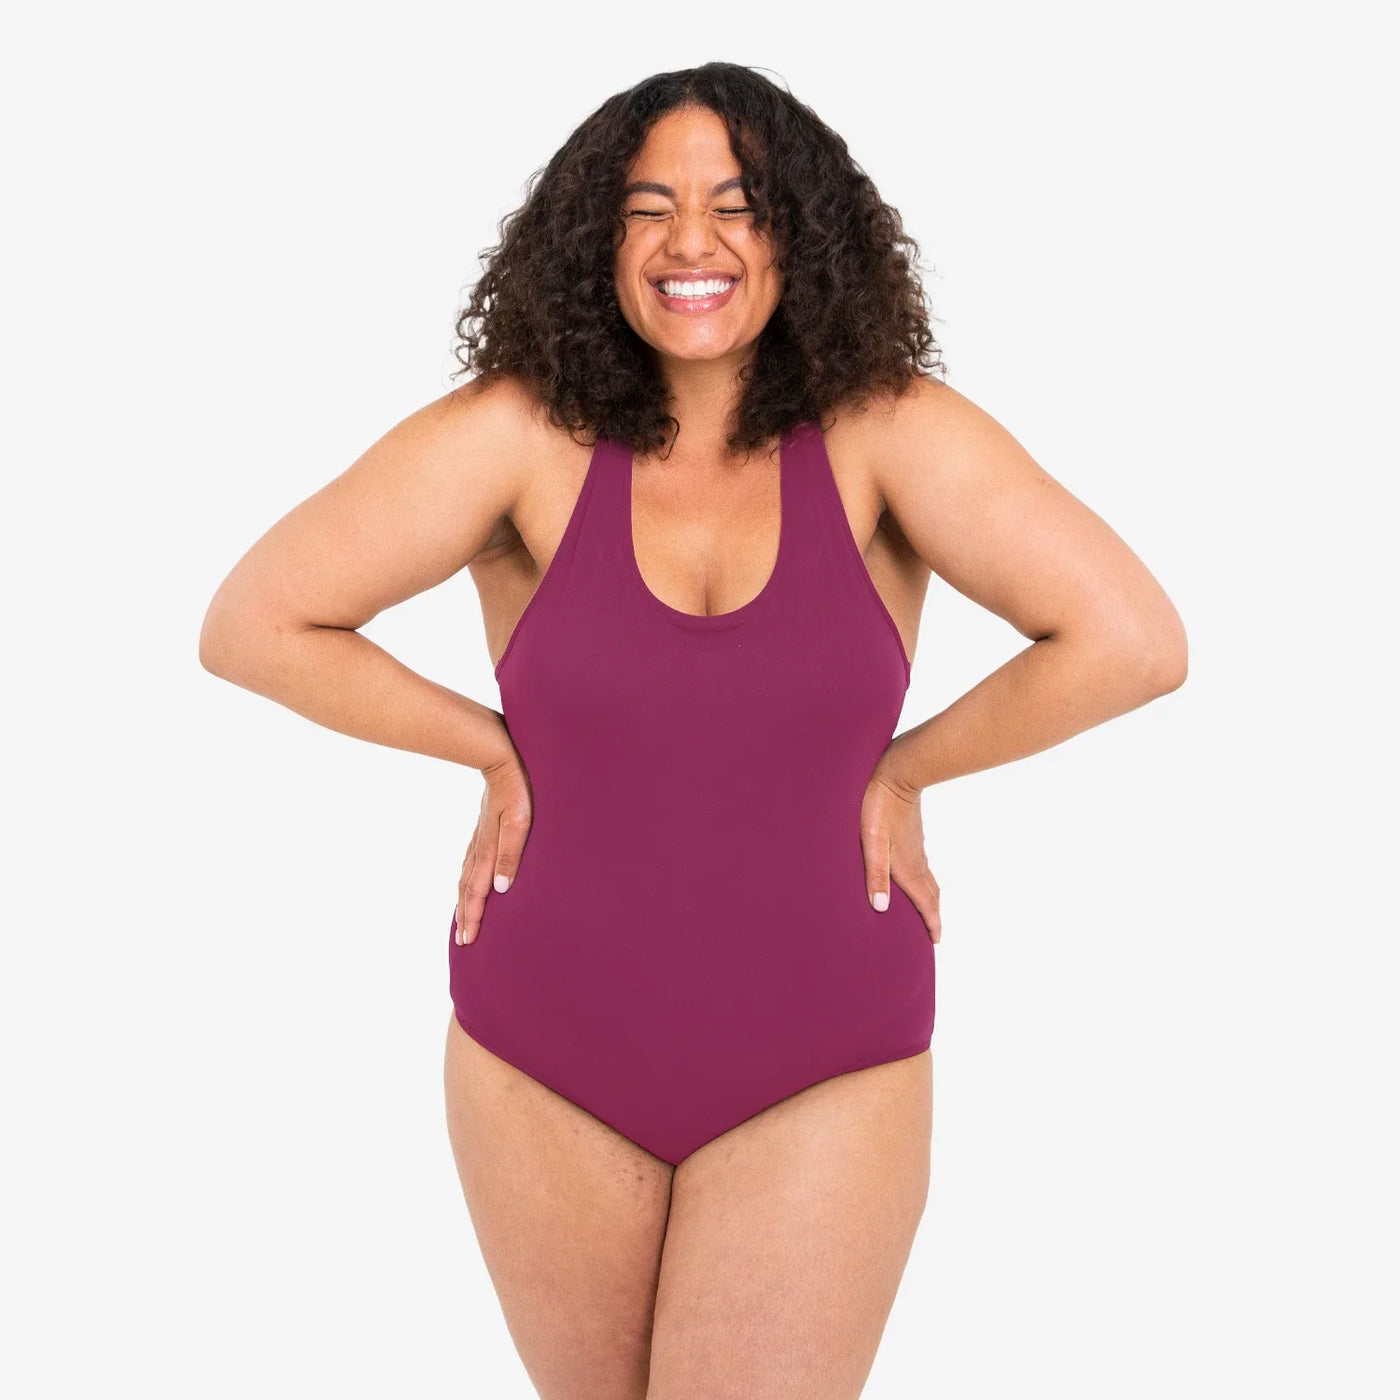 WUKA Scoop Back Period Swimsuit - Deep Pink - Front view